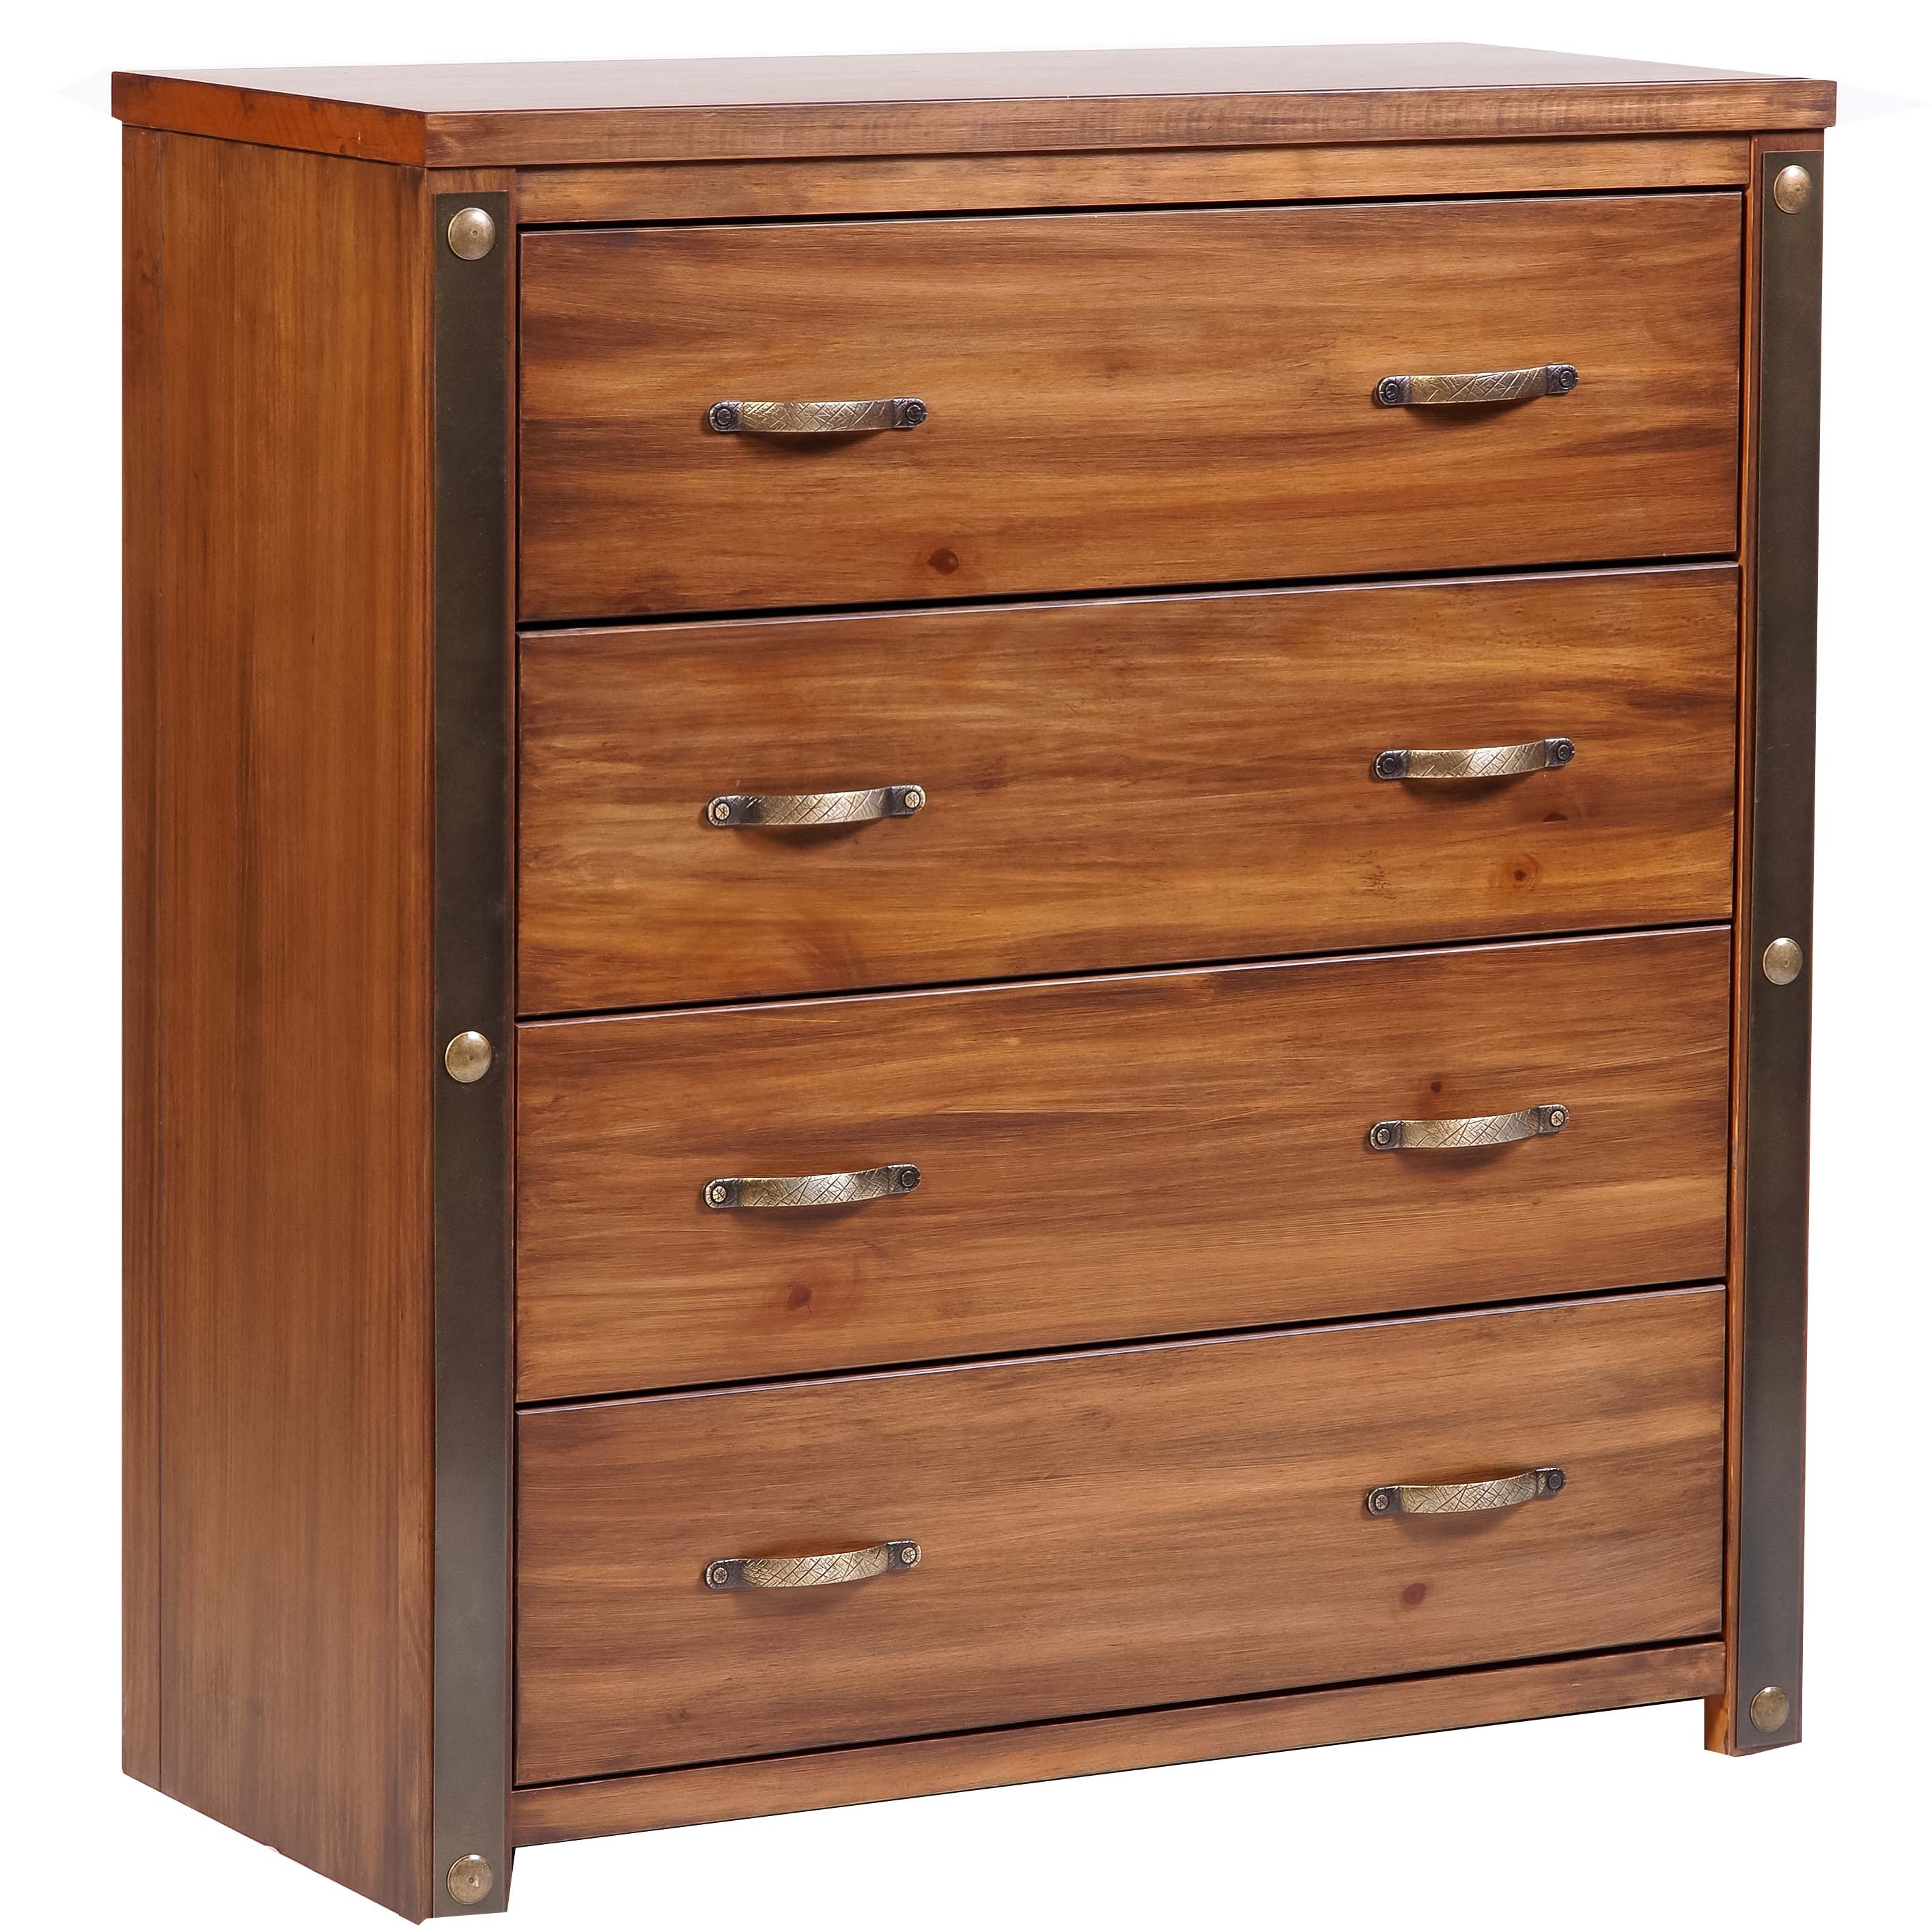 Core Products Forge 4 Drawer Chest